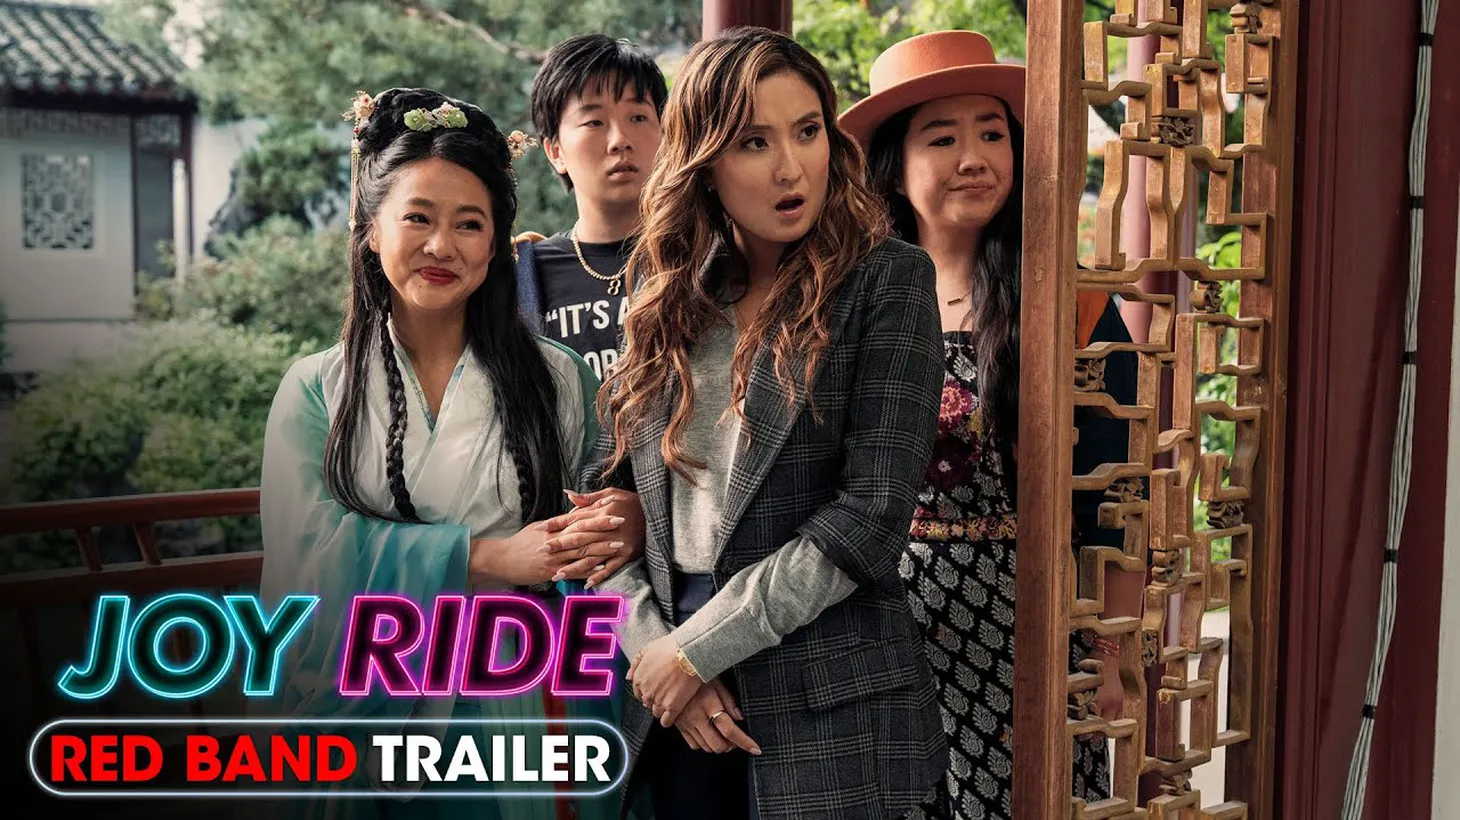 “Joy Ride” follows four friends traveling through Asia, with one of them seeking her birth mother.